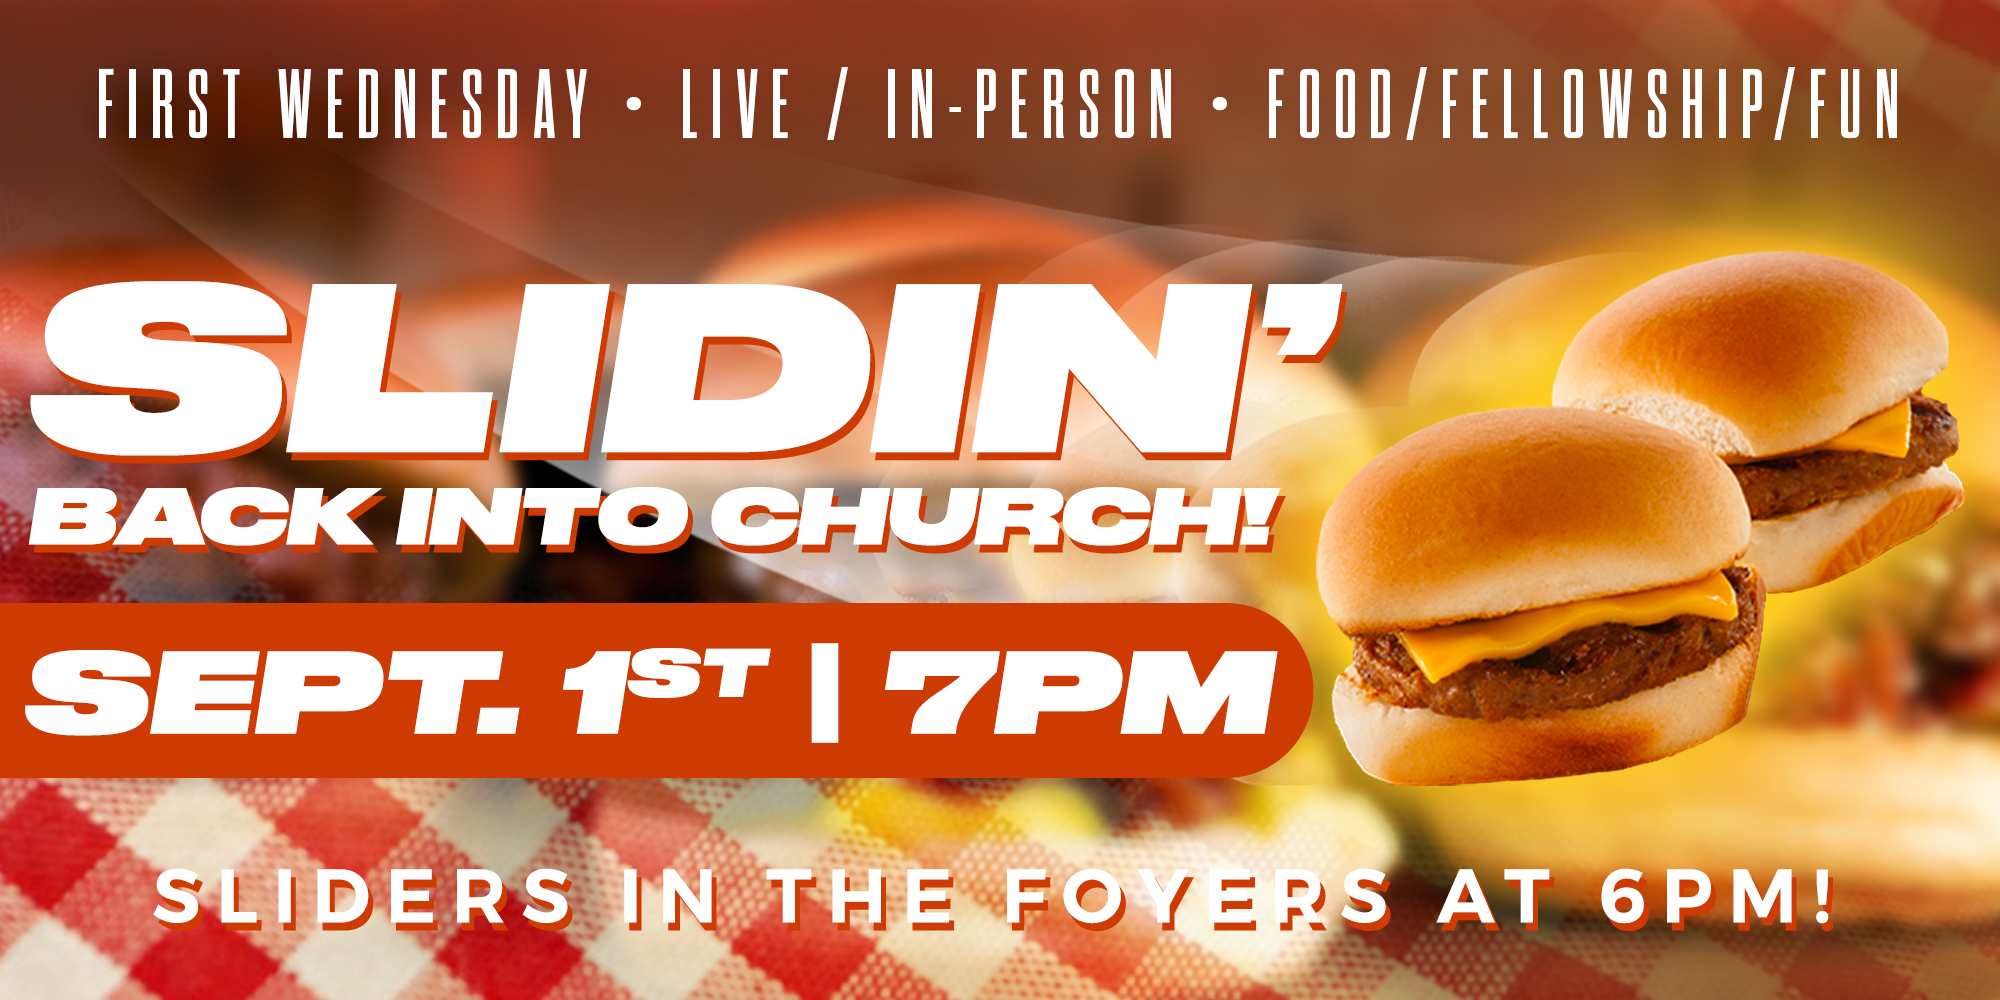 First Wednesday Live/In-person Food/Fellowship/Fun Slidin' Back into Church! Sept. 1st at 7pm Sliders in the Fotyers at 6pm!